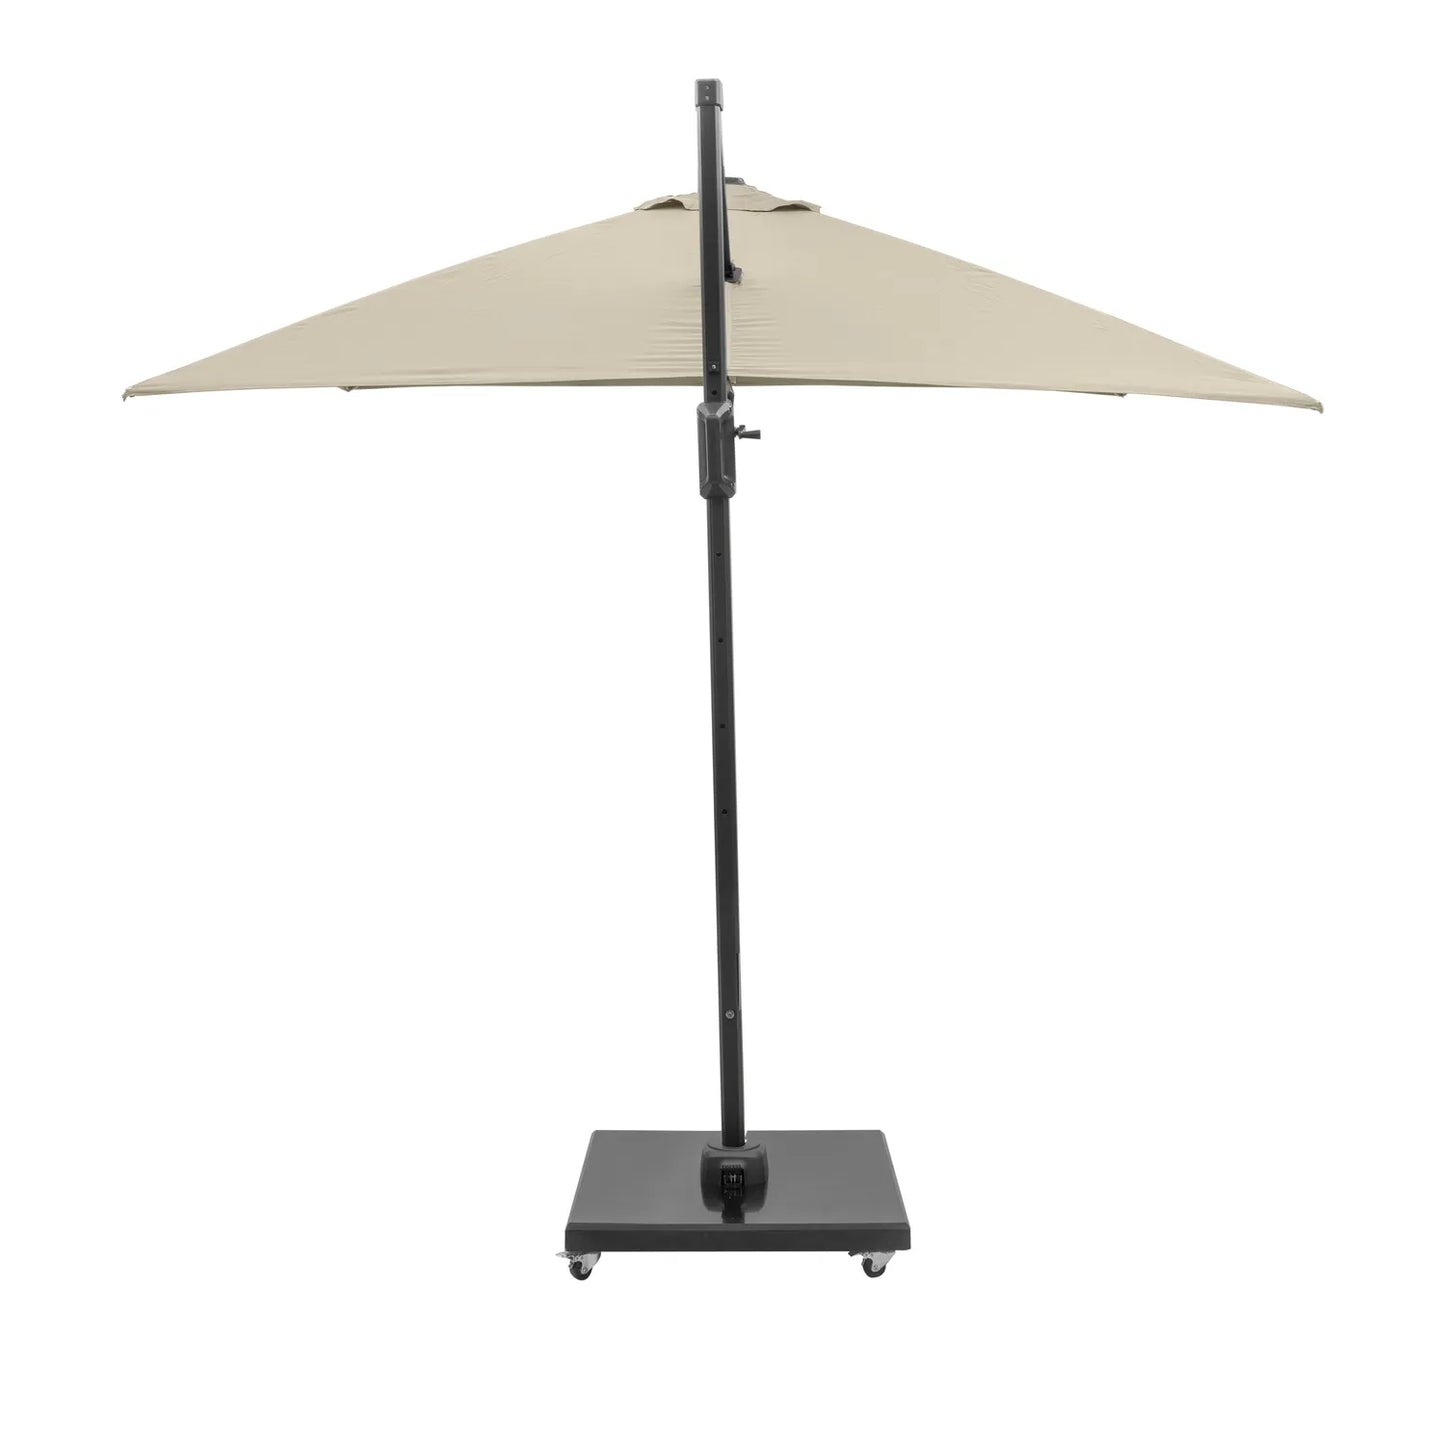 Platinum Challenger T2 3m Square Cantilever Parasol in Champagne – Click Style